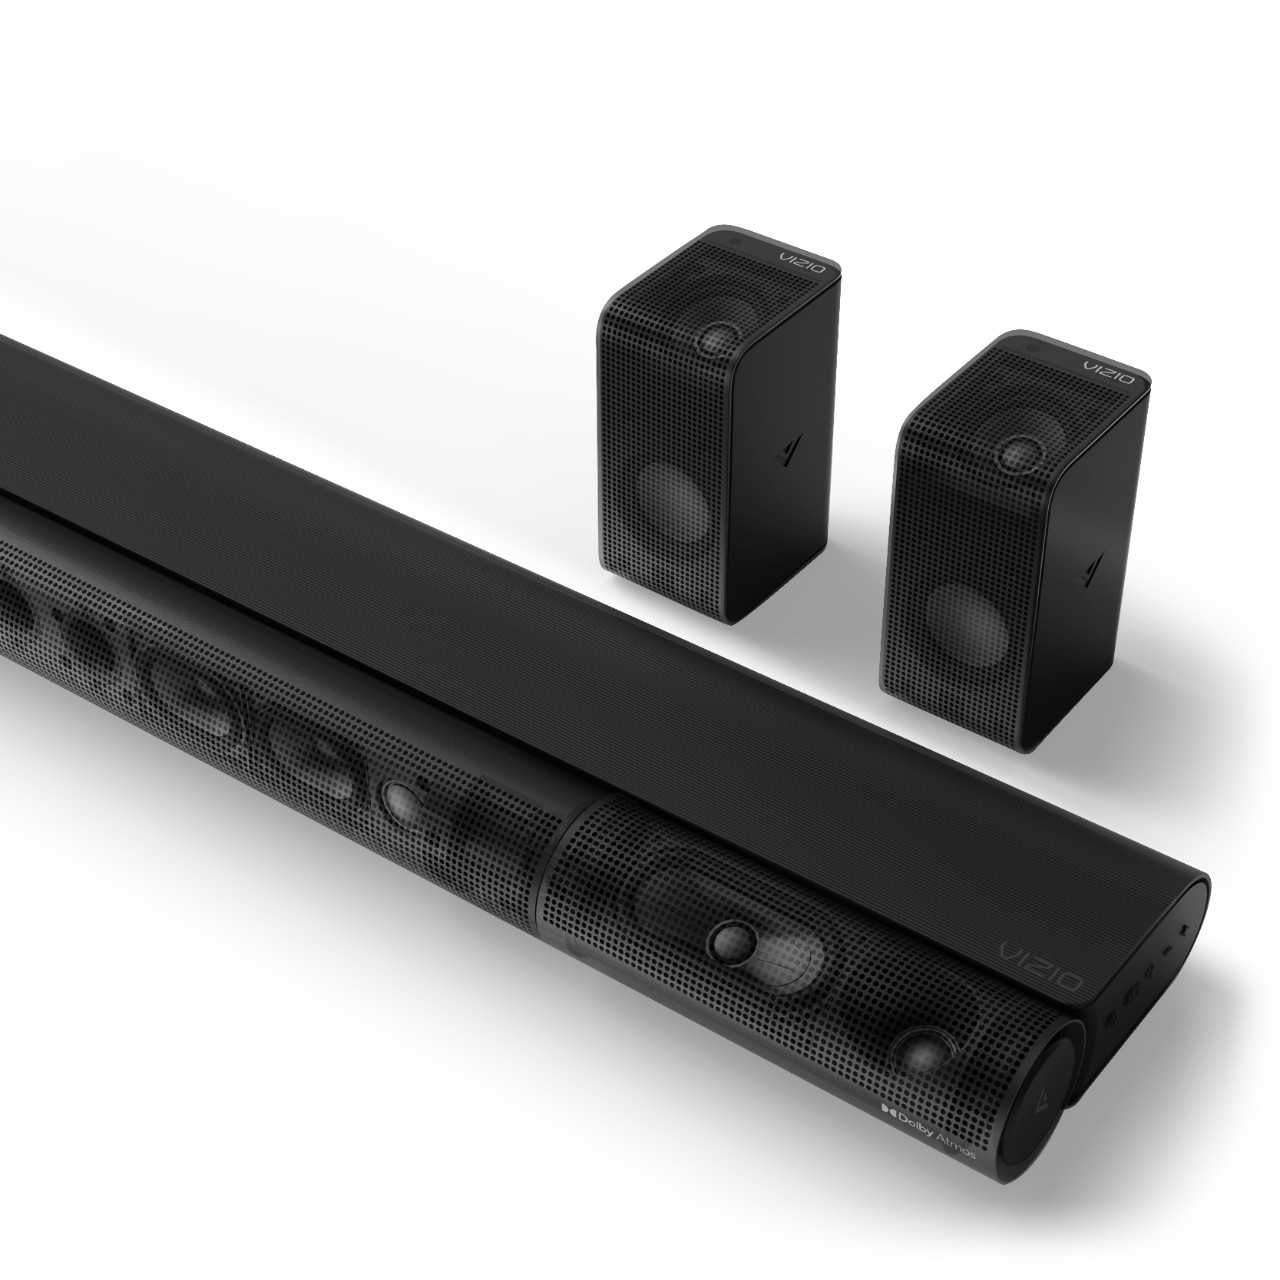 VIZIO Elevate 5.1.4 Home Theater Sound Bar with Dolby Atmos and DTS:X - P514a-H6 - image 4 of 21